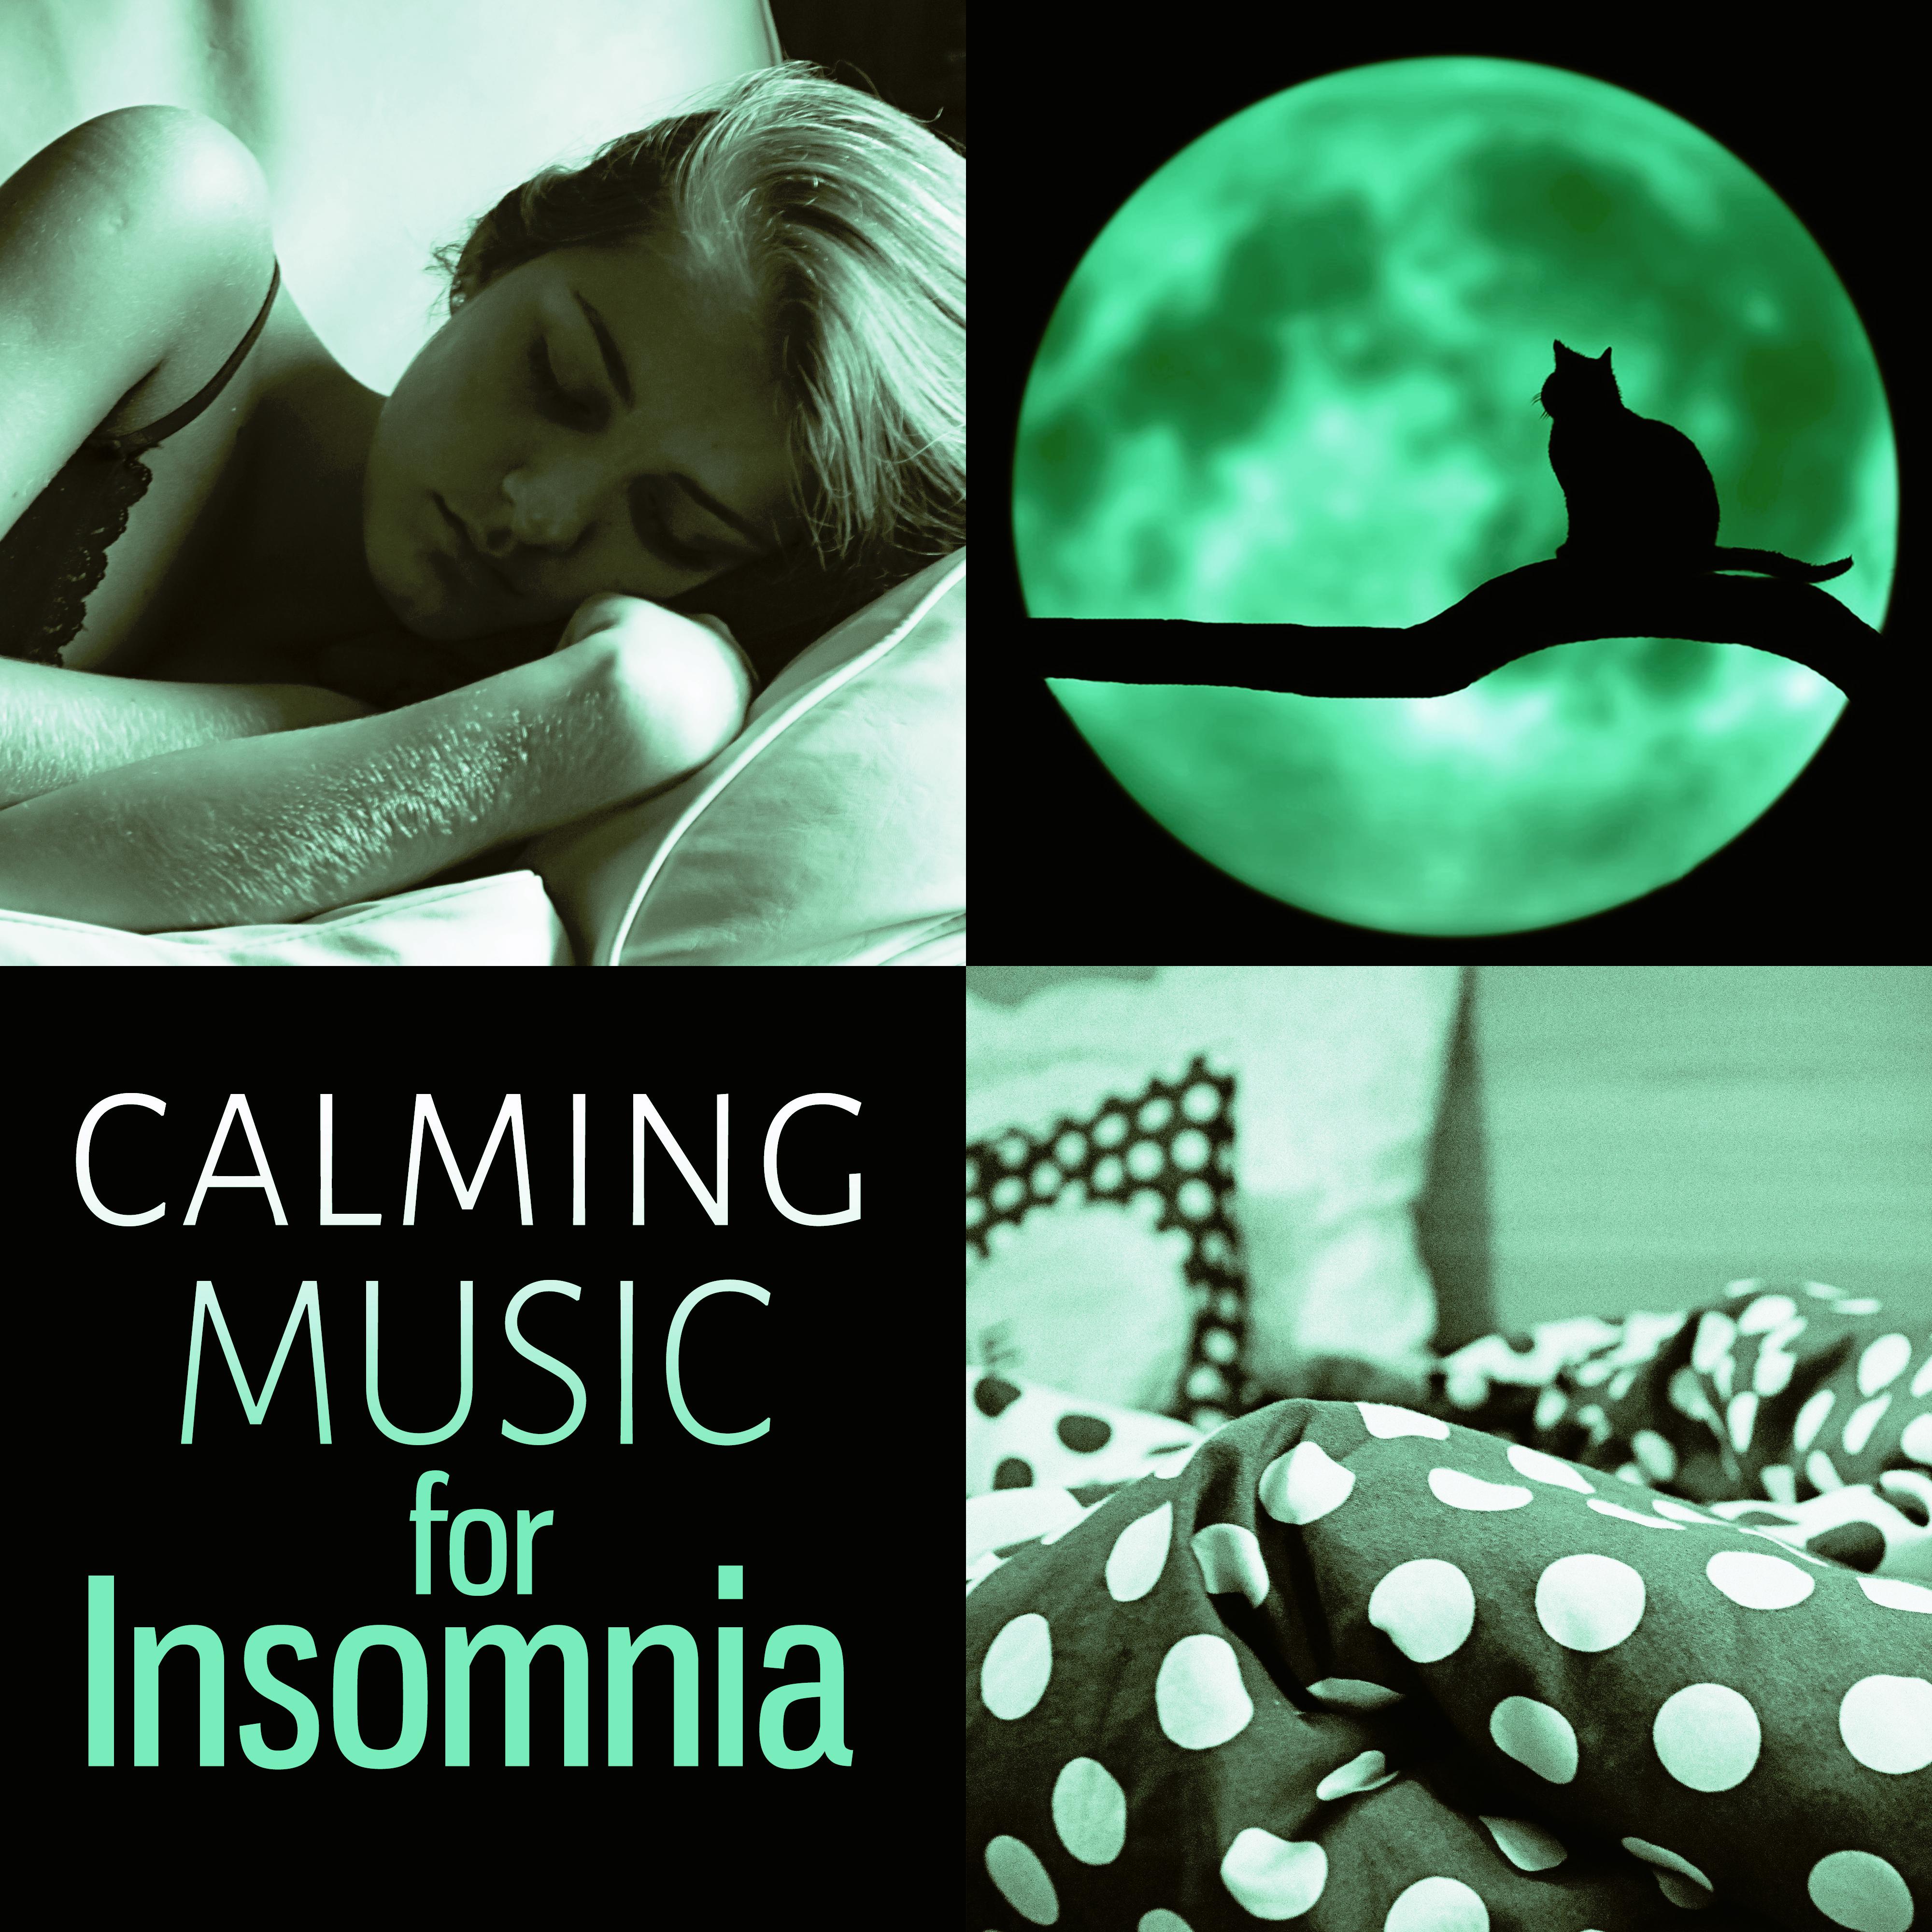 Calming Music for Insomnia  Soothing and Relaxing Music for Sleeping, Sweet Dreams, Natural White Noise, Rest, Deep Dream